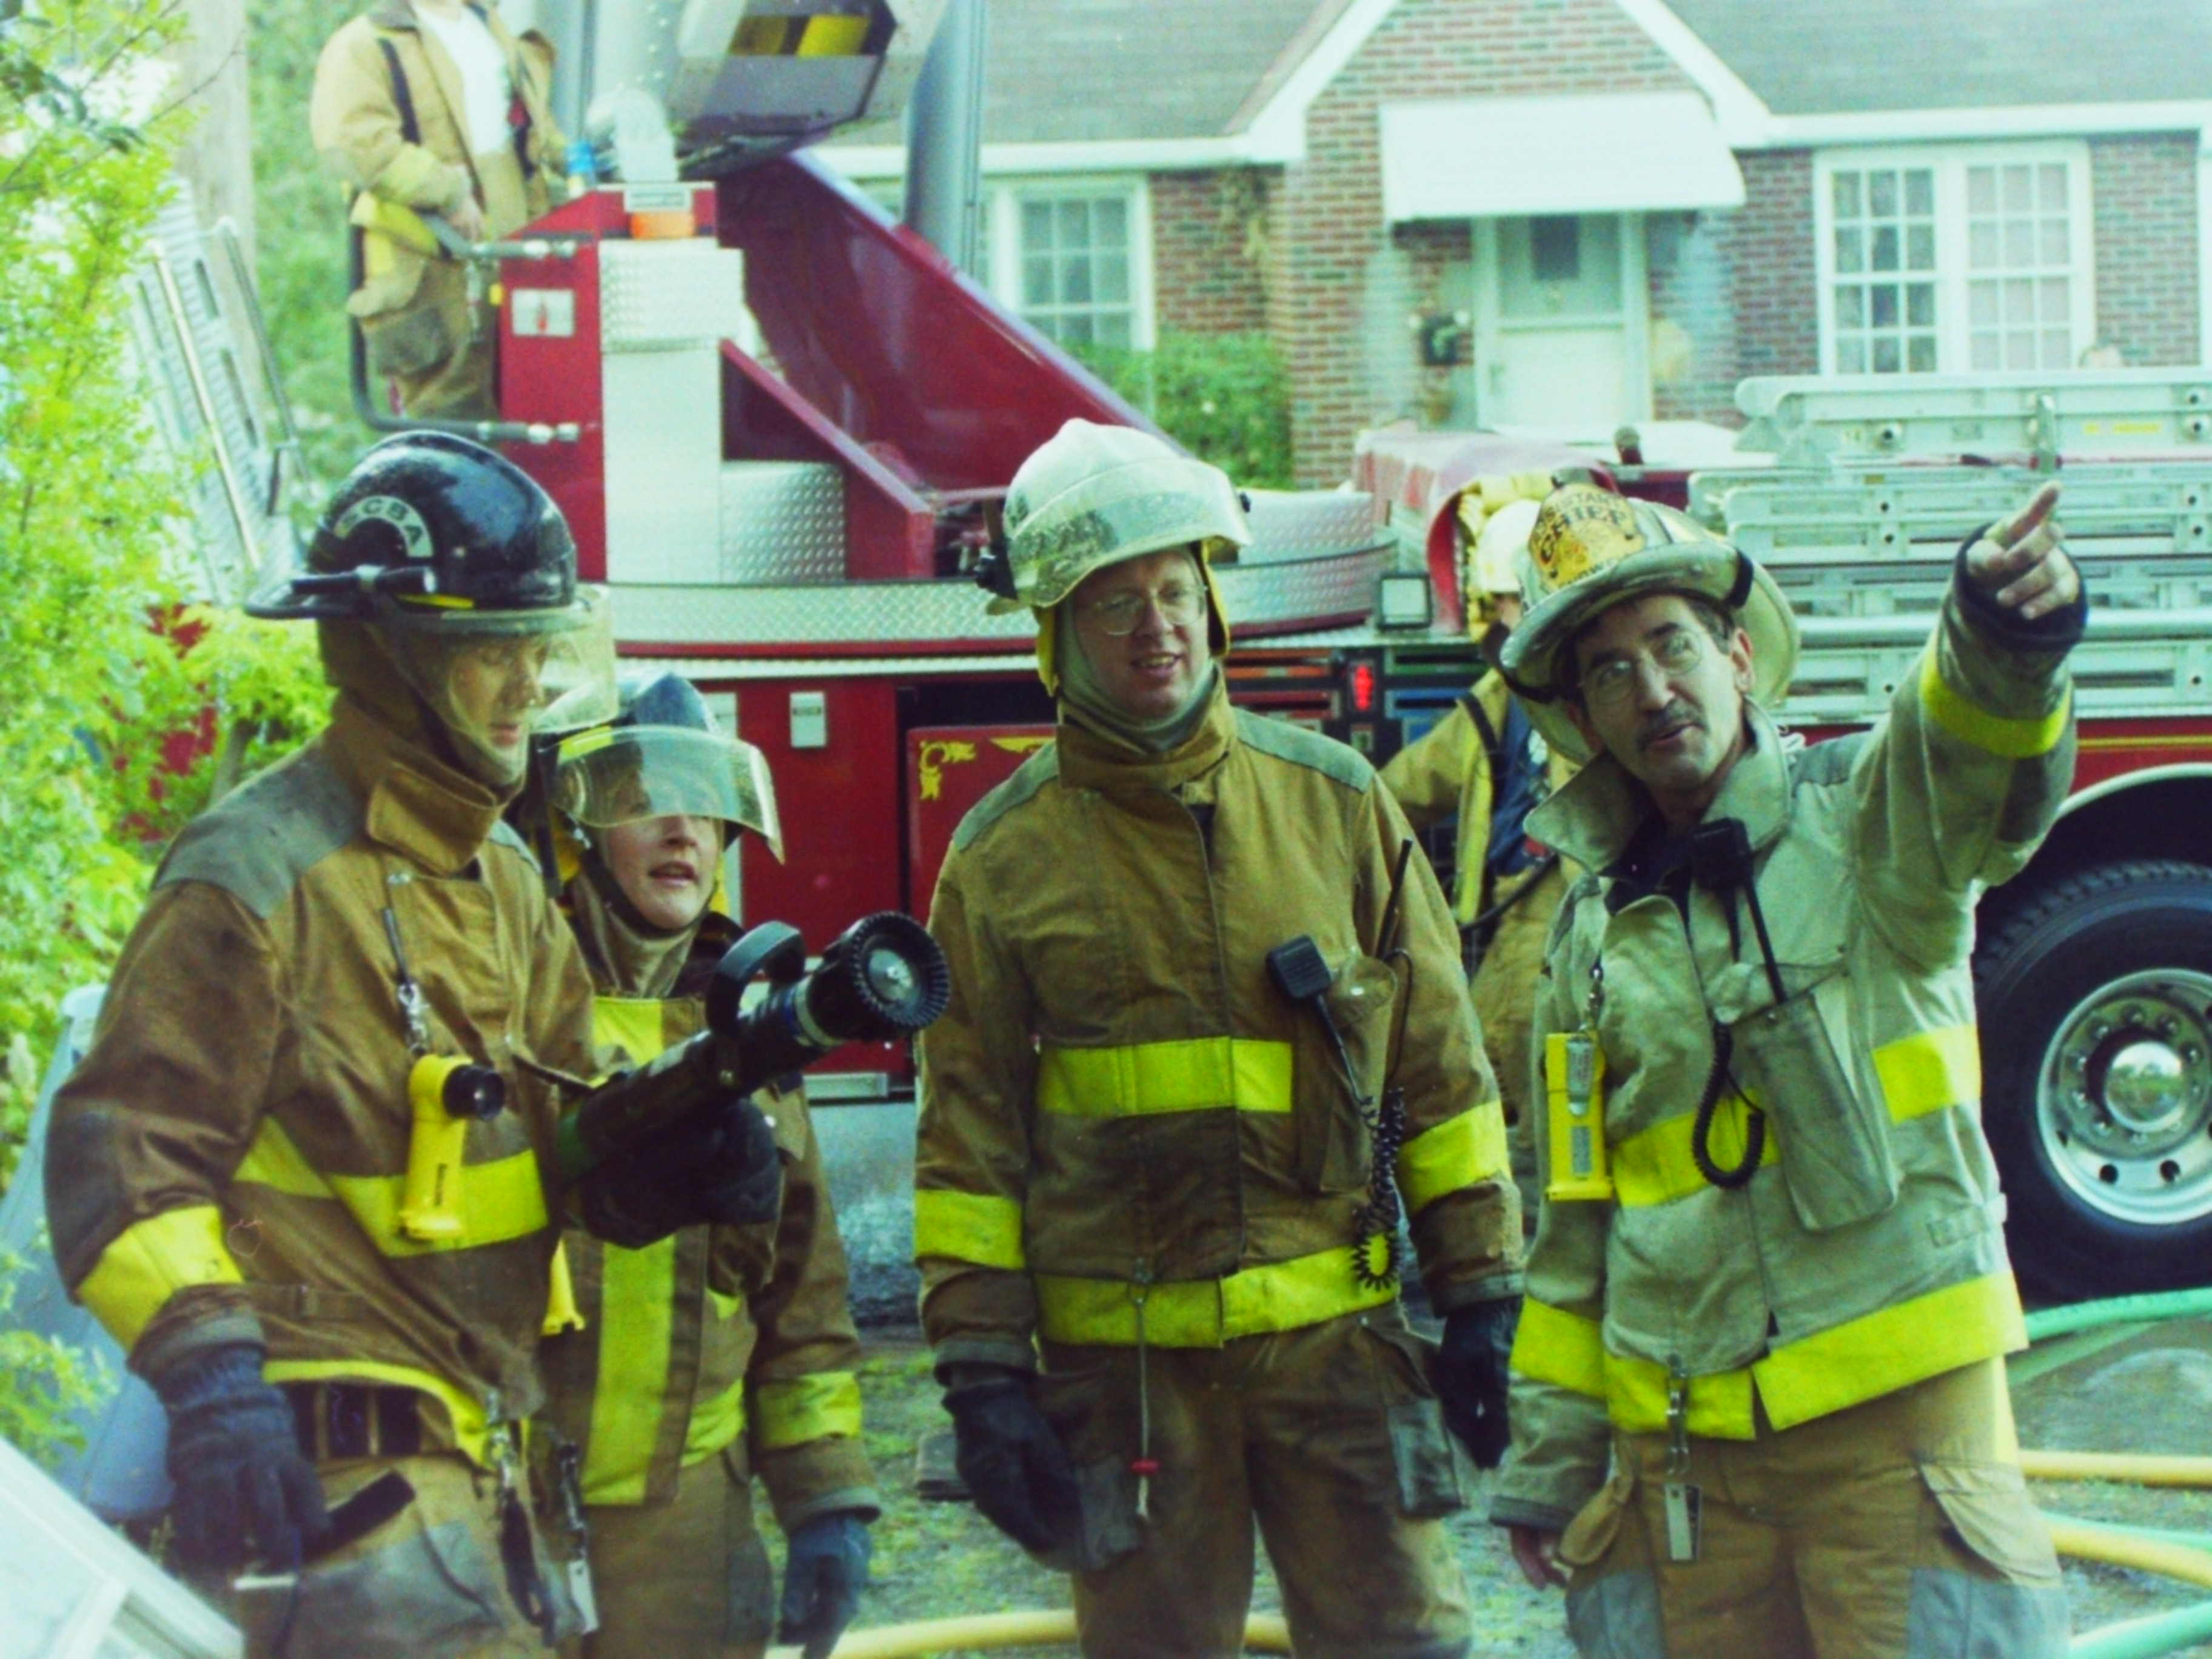 08-19-00  Training - Hoover Ave